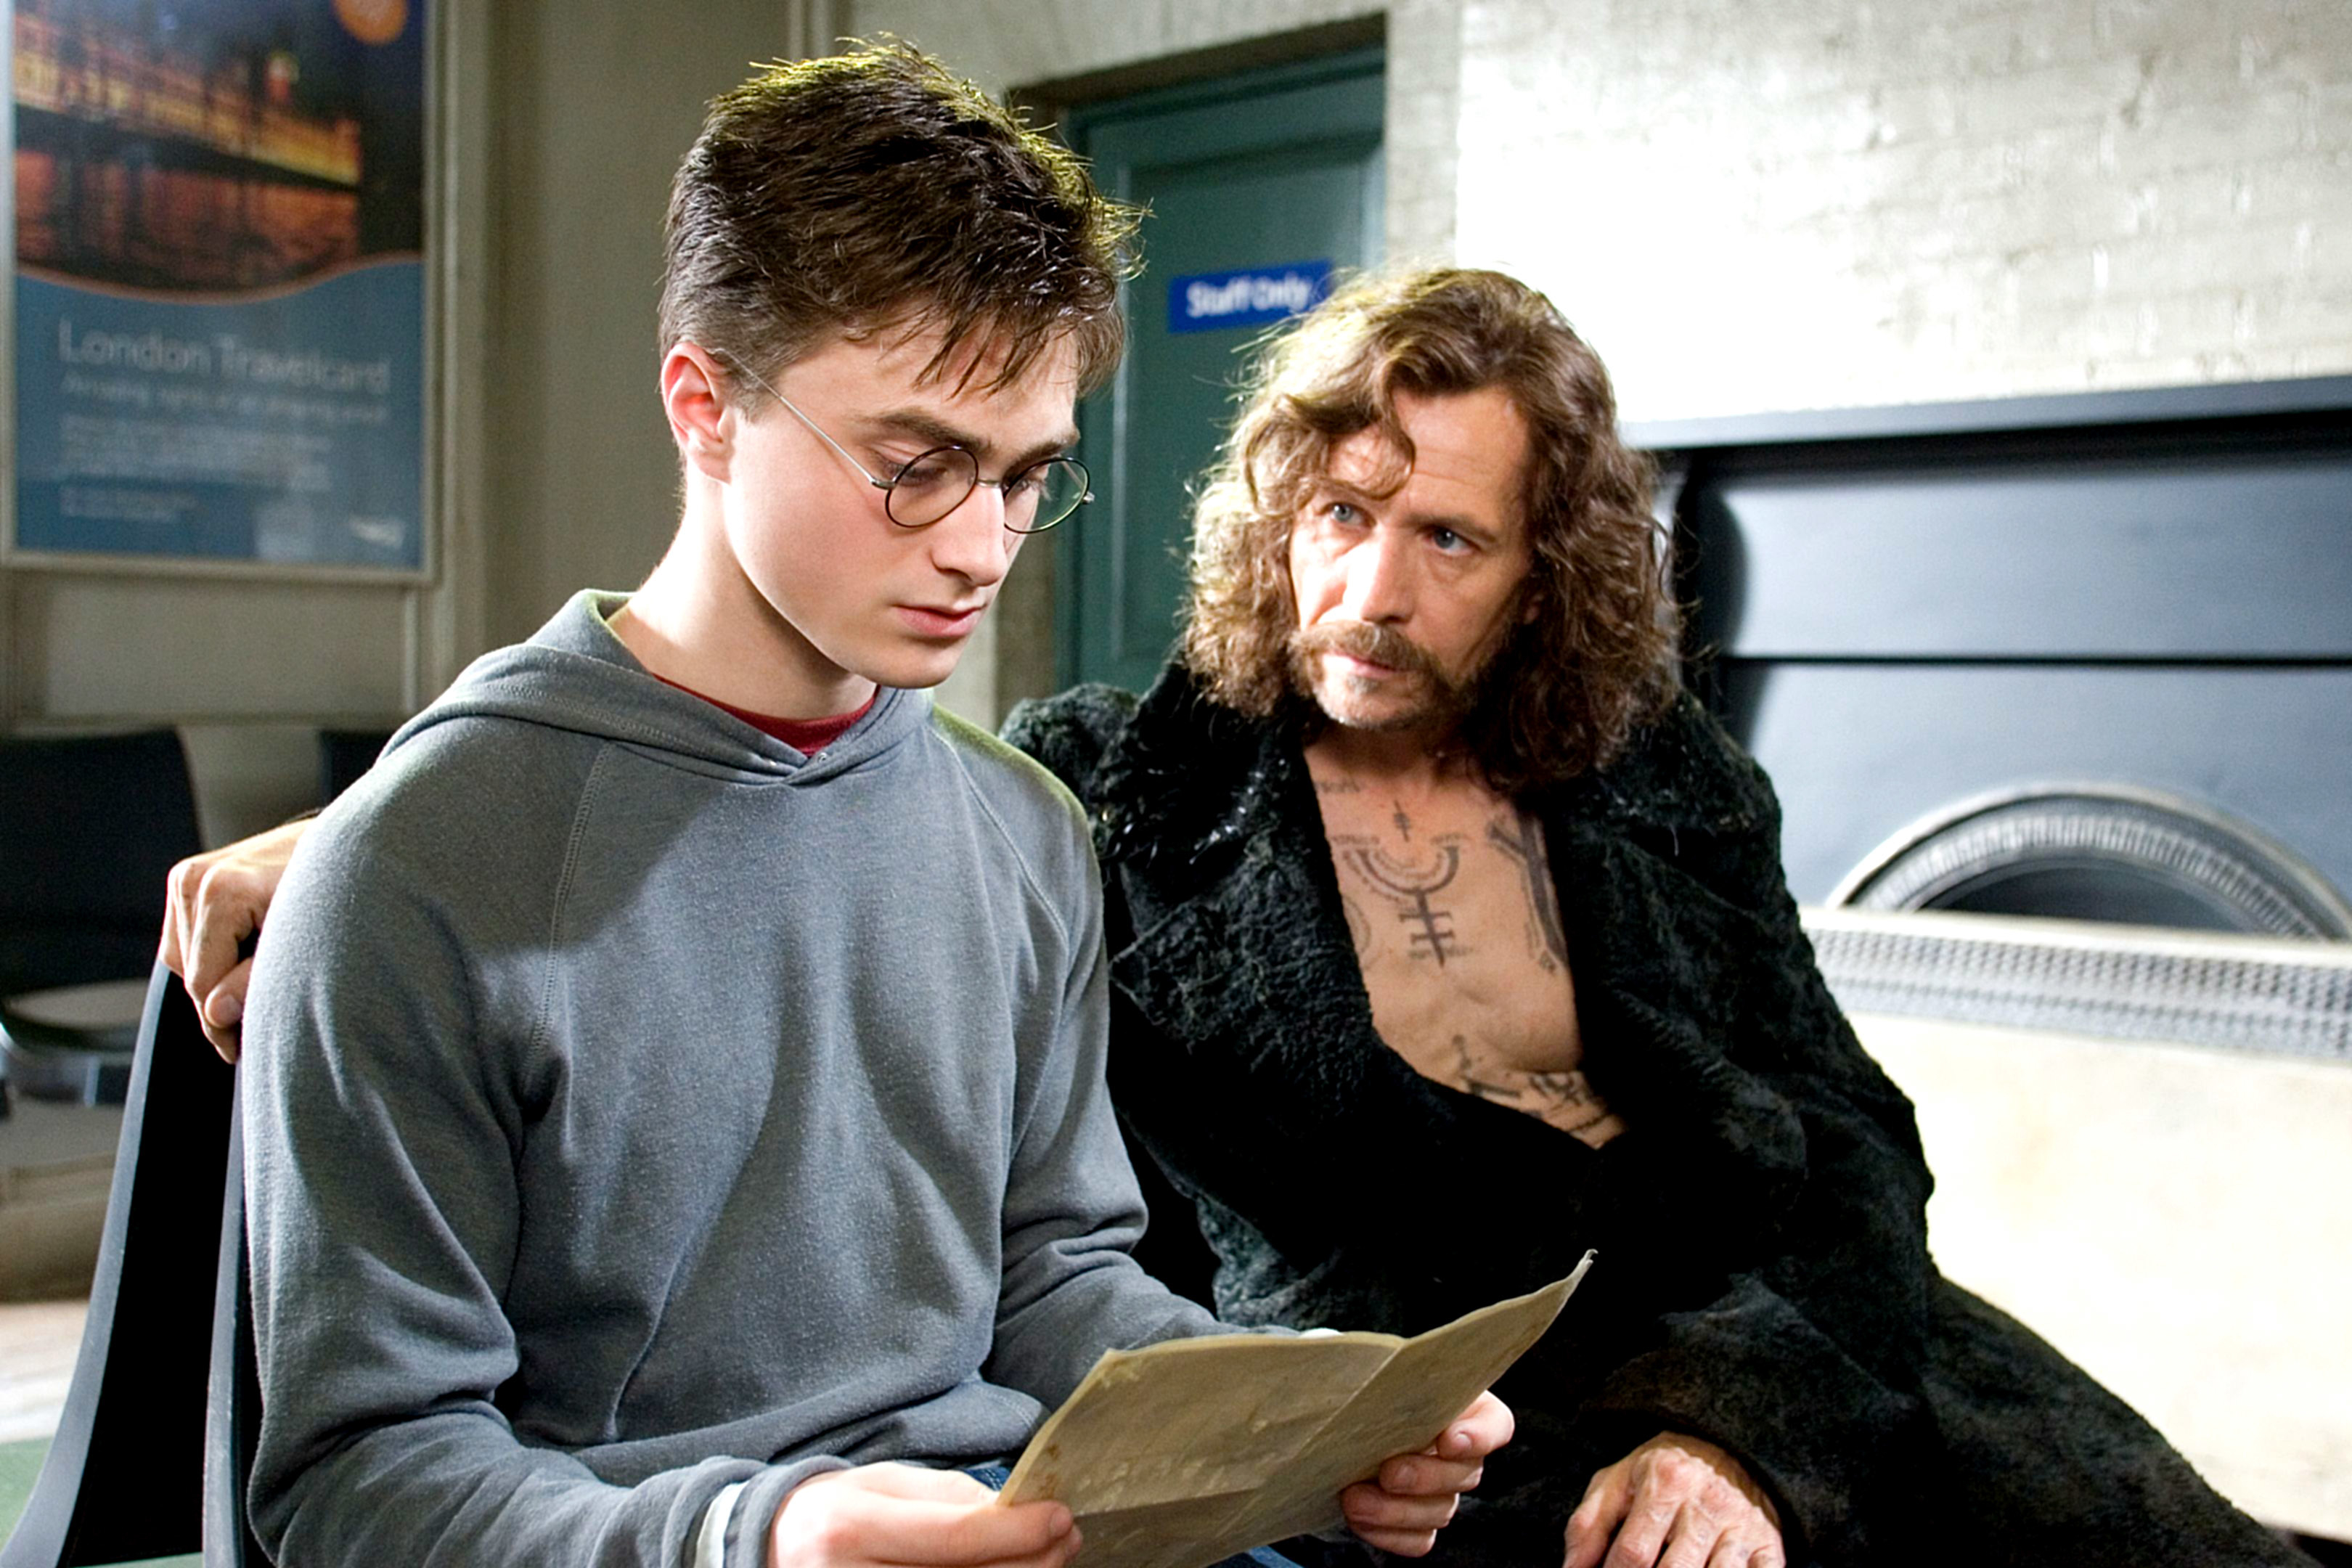 Harry Potter and Sirius Black looking at a document inside a dim room. Sirius wears a dark, textured coat